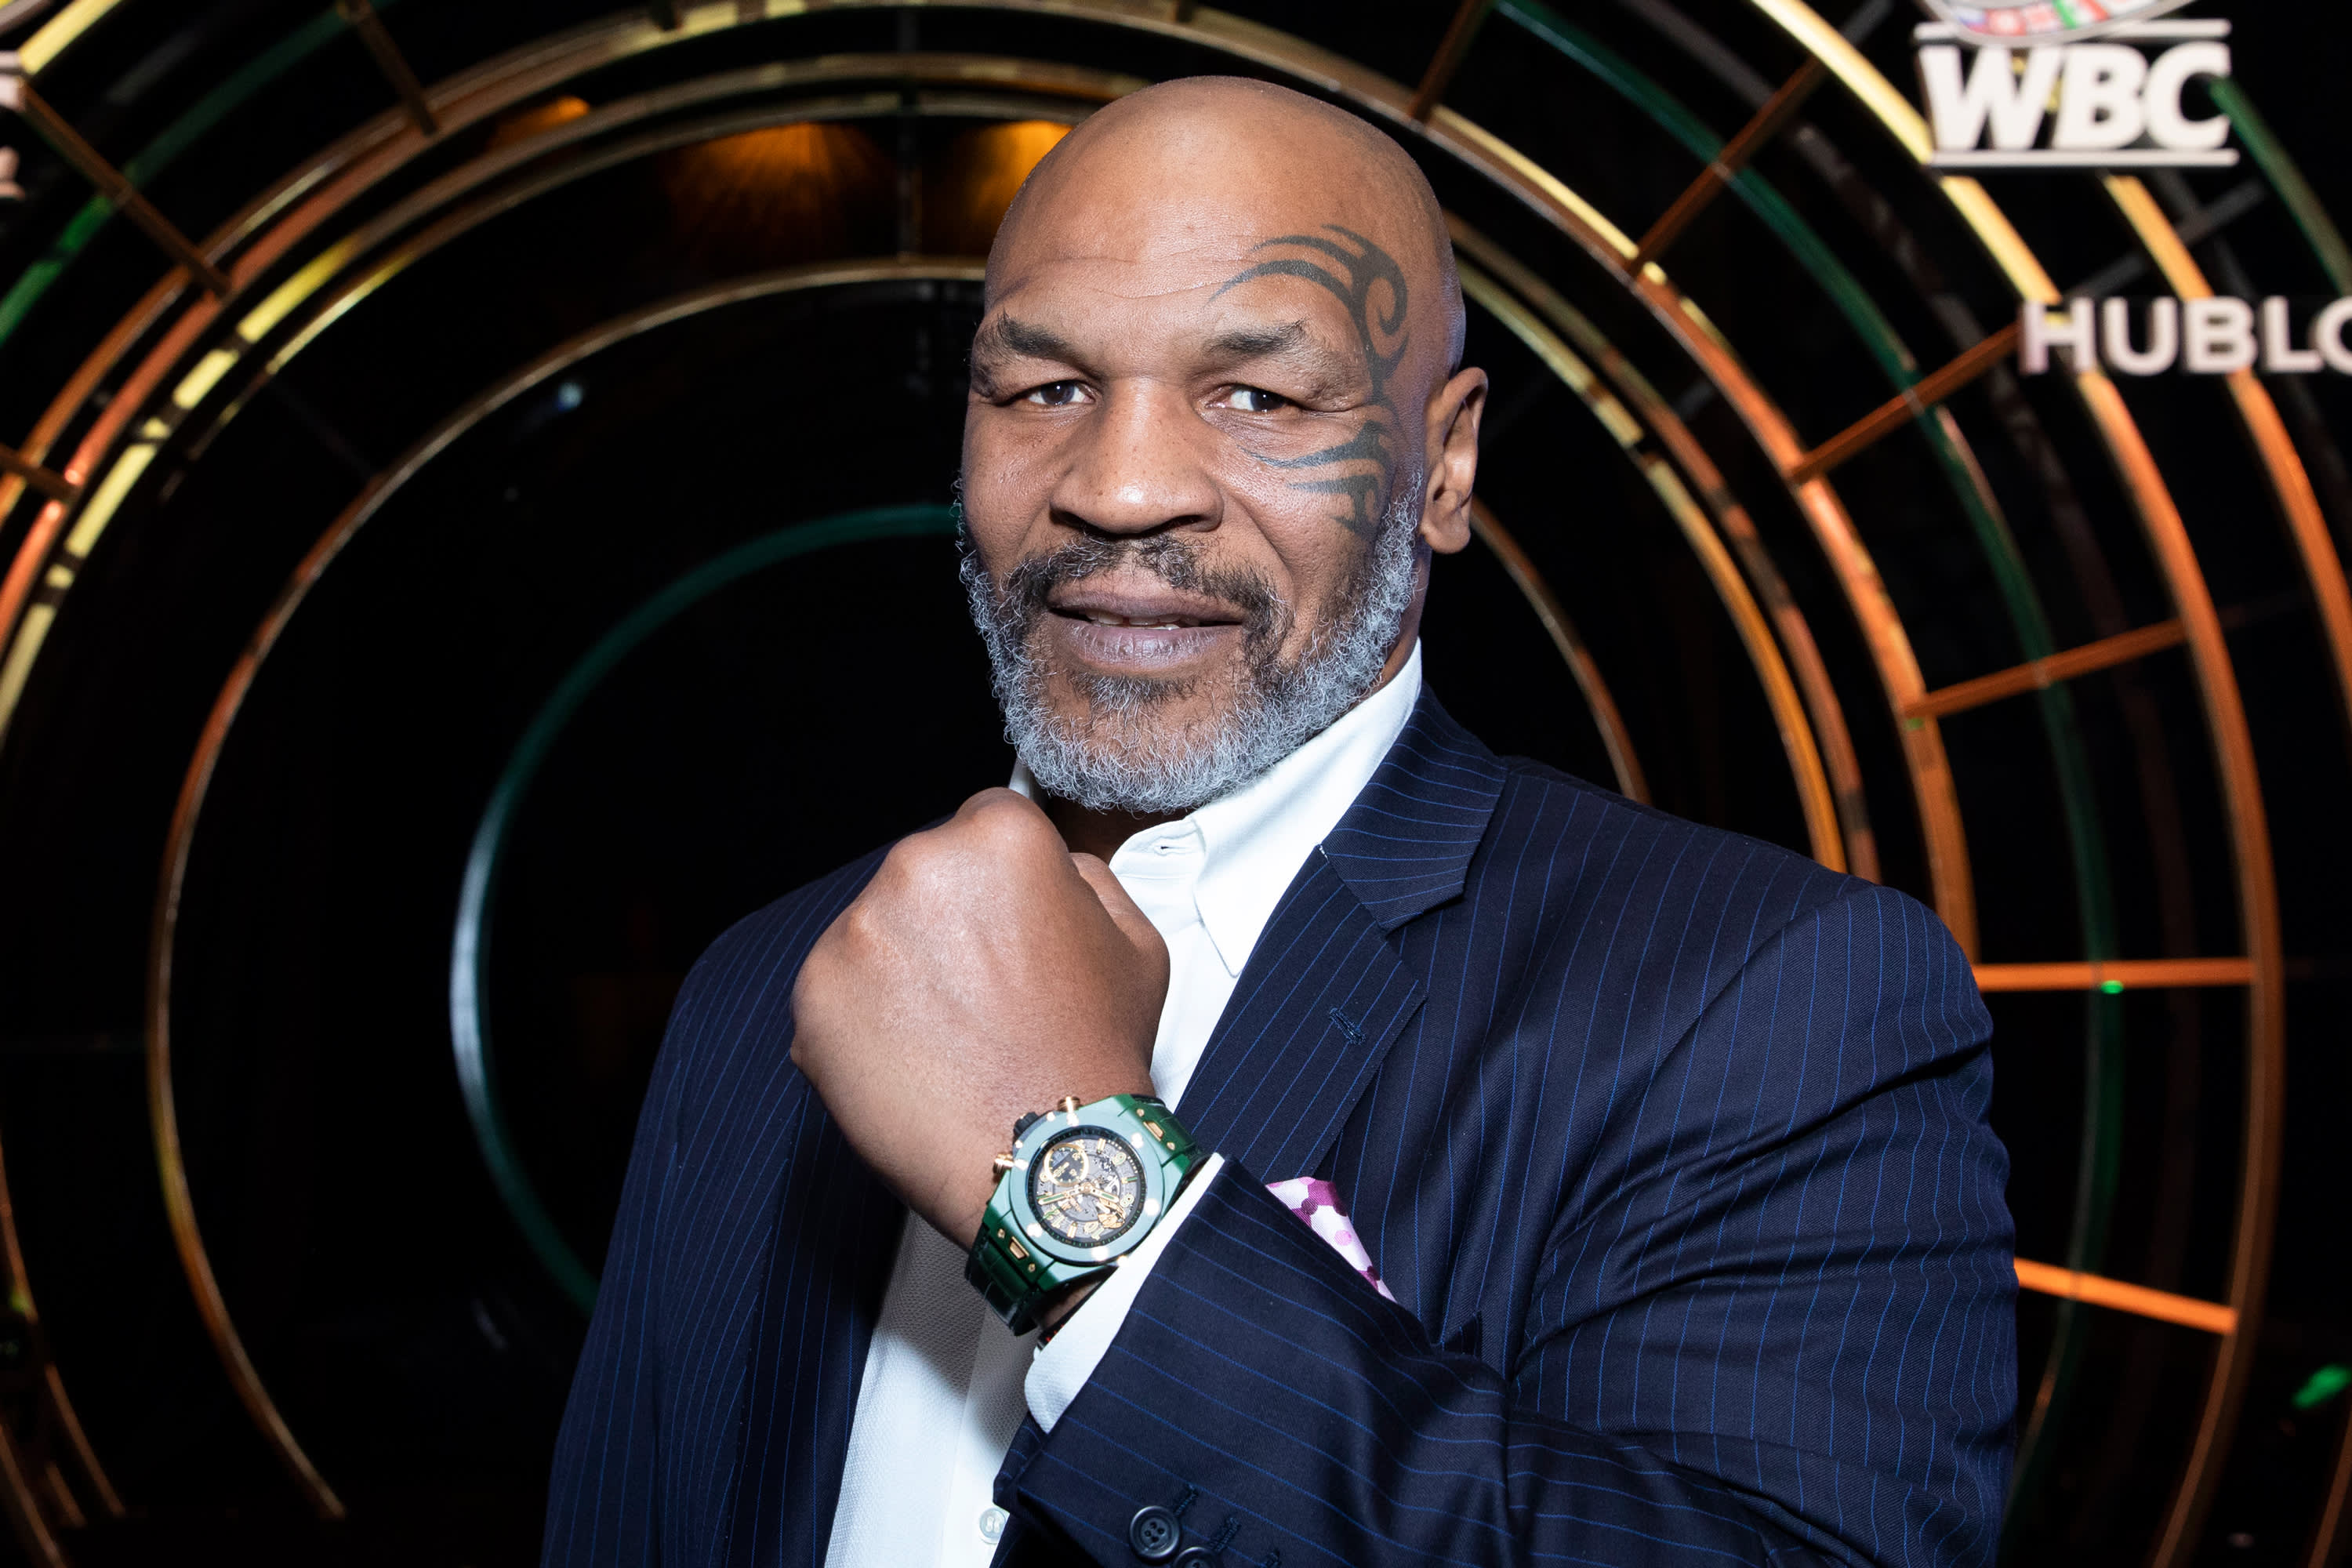 Mike Tyson Wont Face Charges for Punching Fellow Airplane Passenger, DA Says